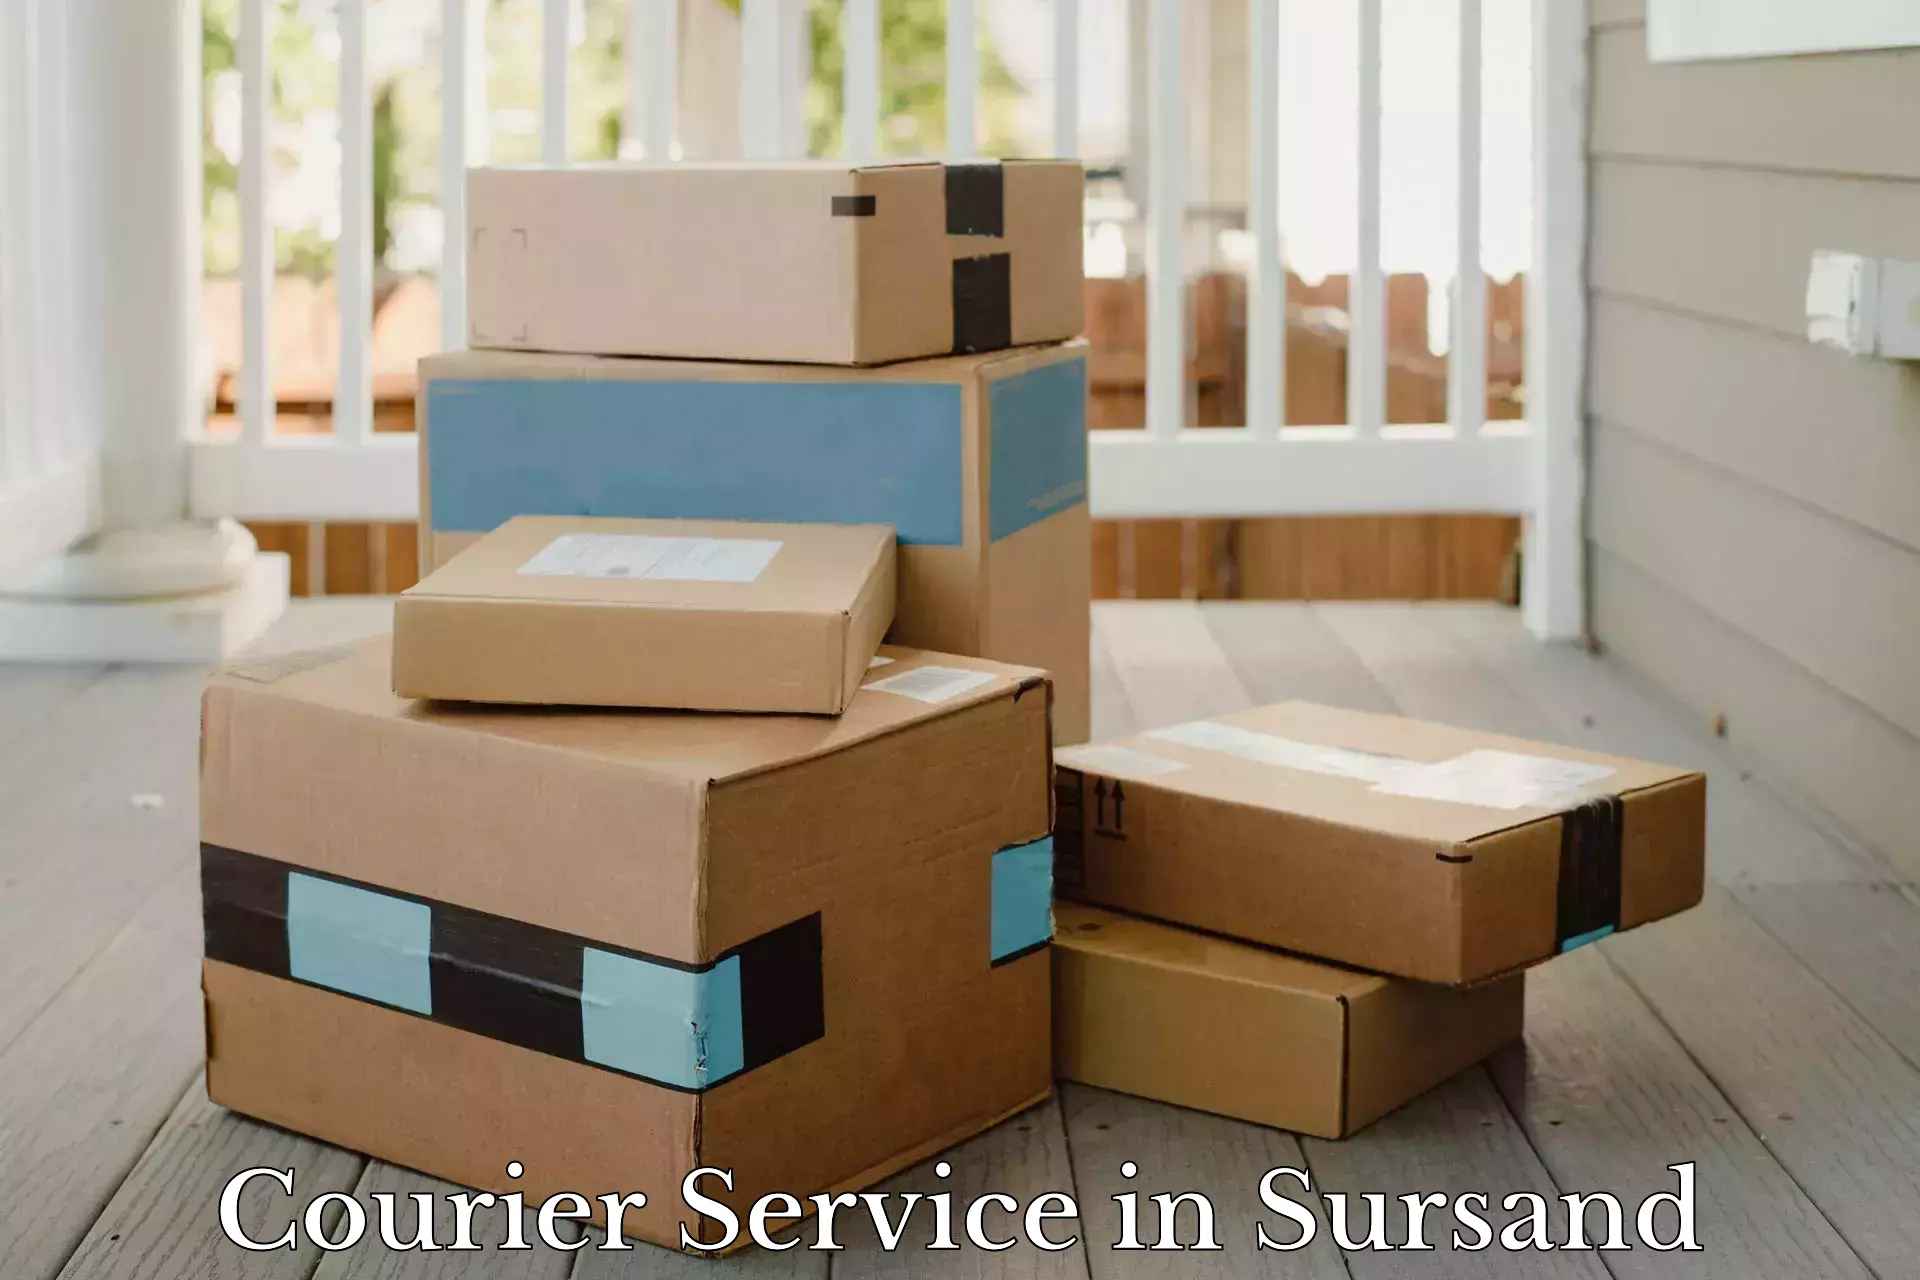 Cash on delivery service in Sursand